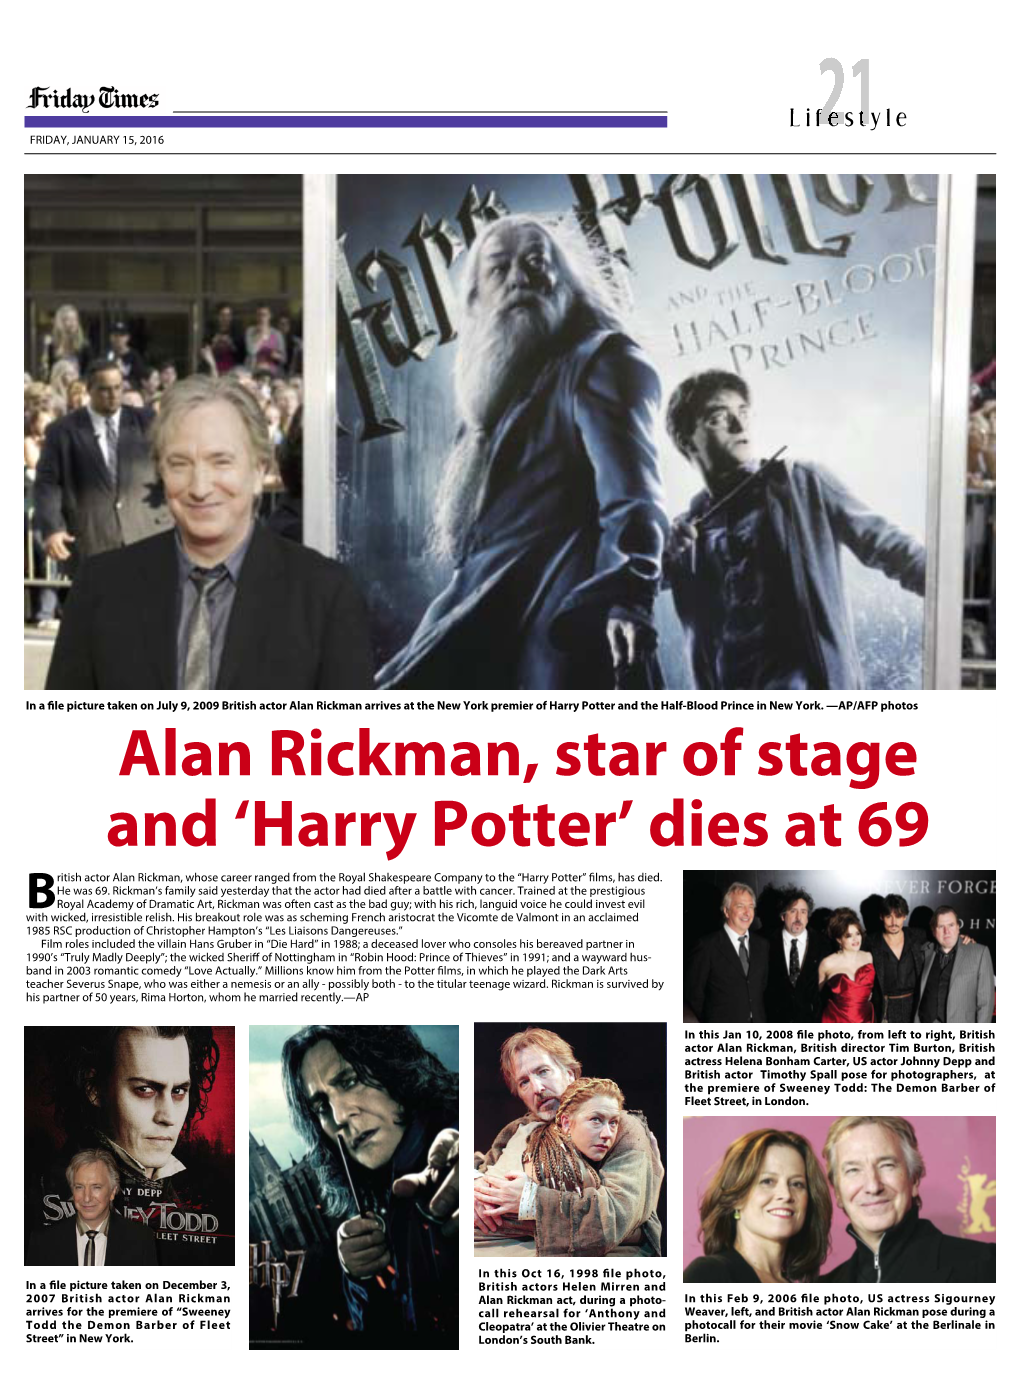 Alan Rickman, Star of Stage and 'Harry Potter'